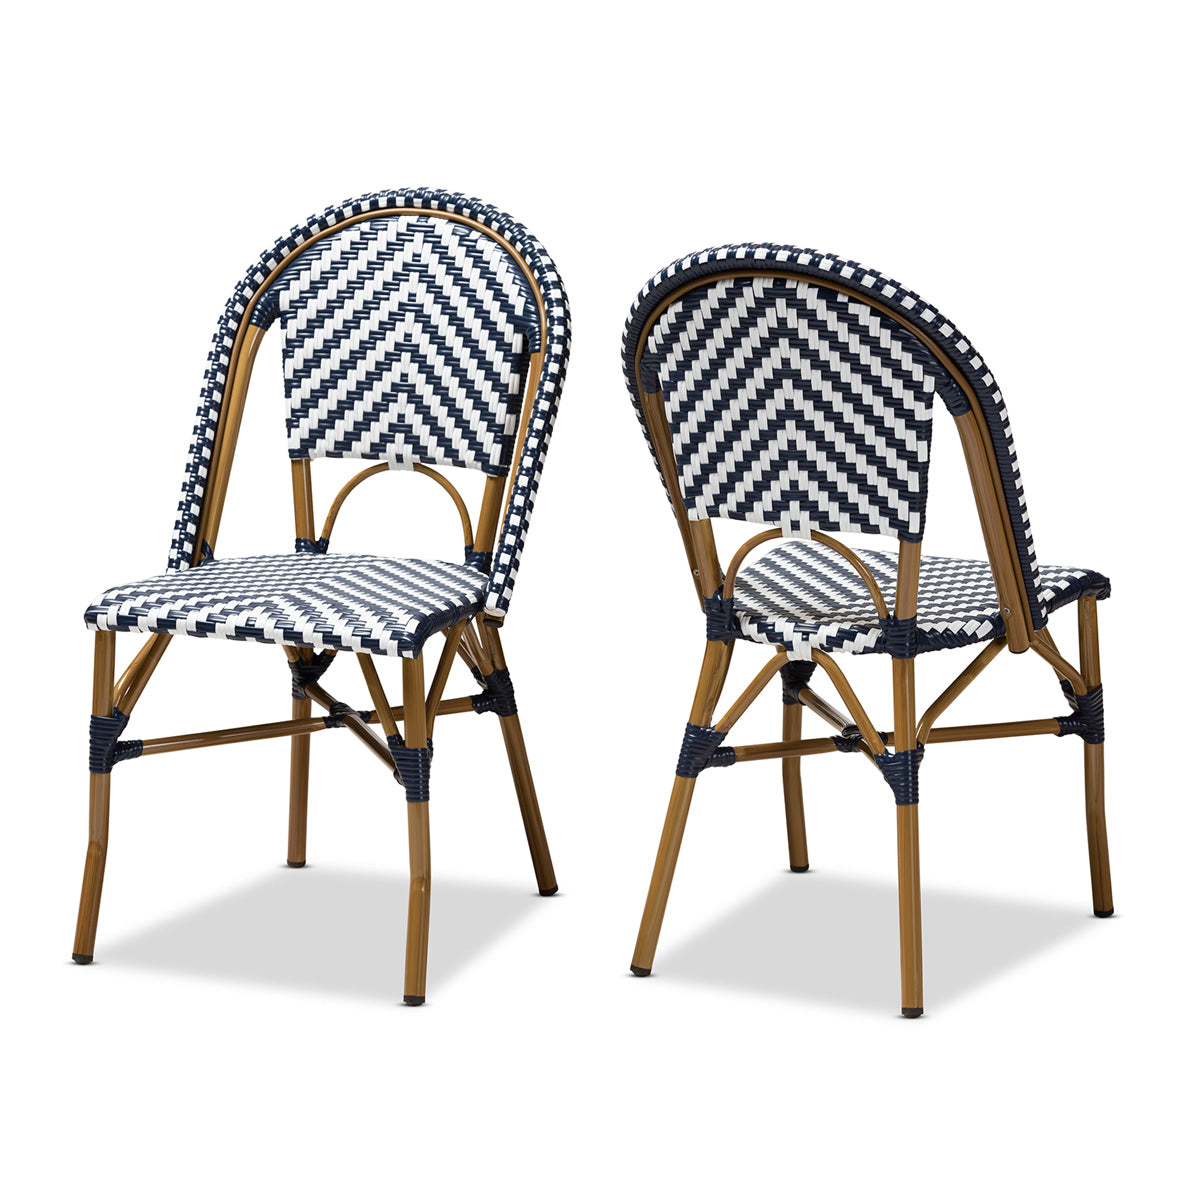 Baxton Studio Celie Classic French Indoor and Outdoor Grey and White Bamboo Style Stackable Bistro Dining Chair Set of 2 Baxton Studio-dining chair-Minimal And Modern - 1